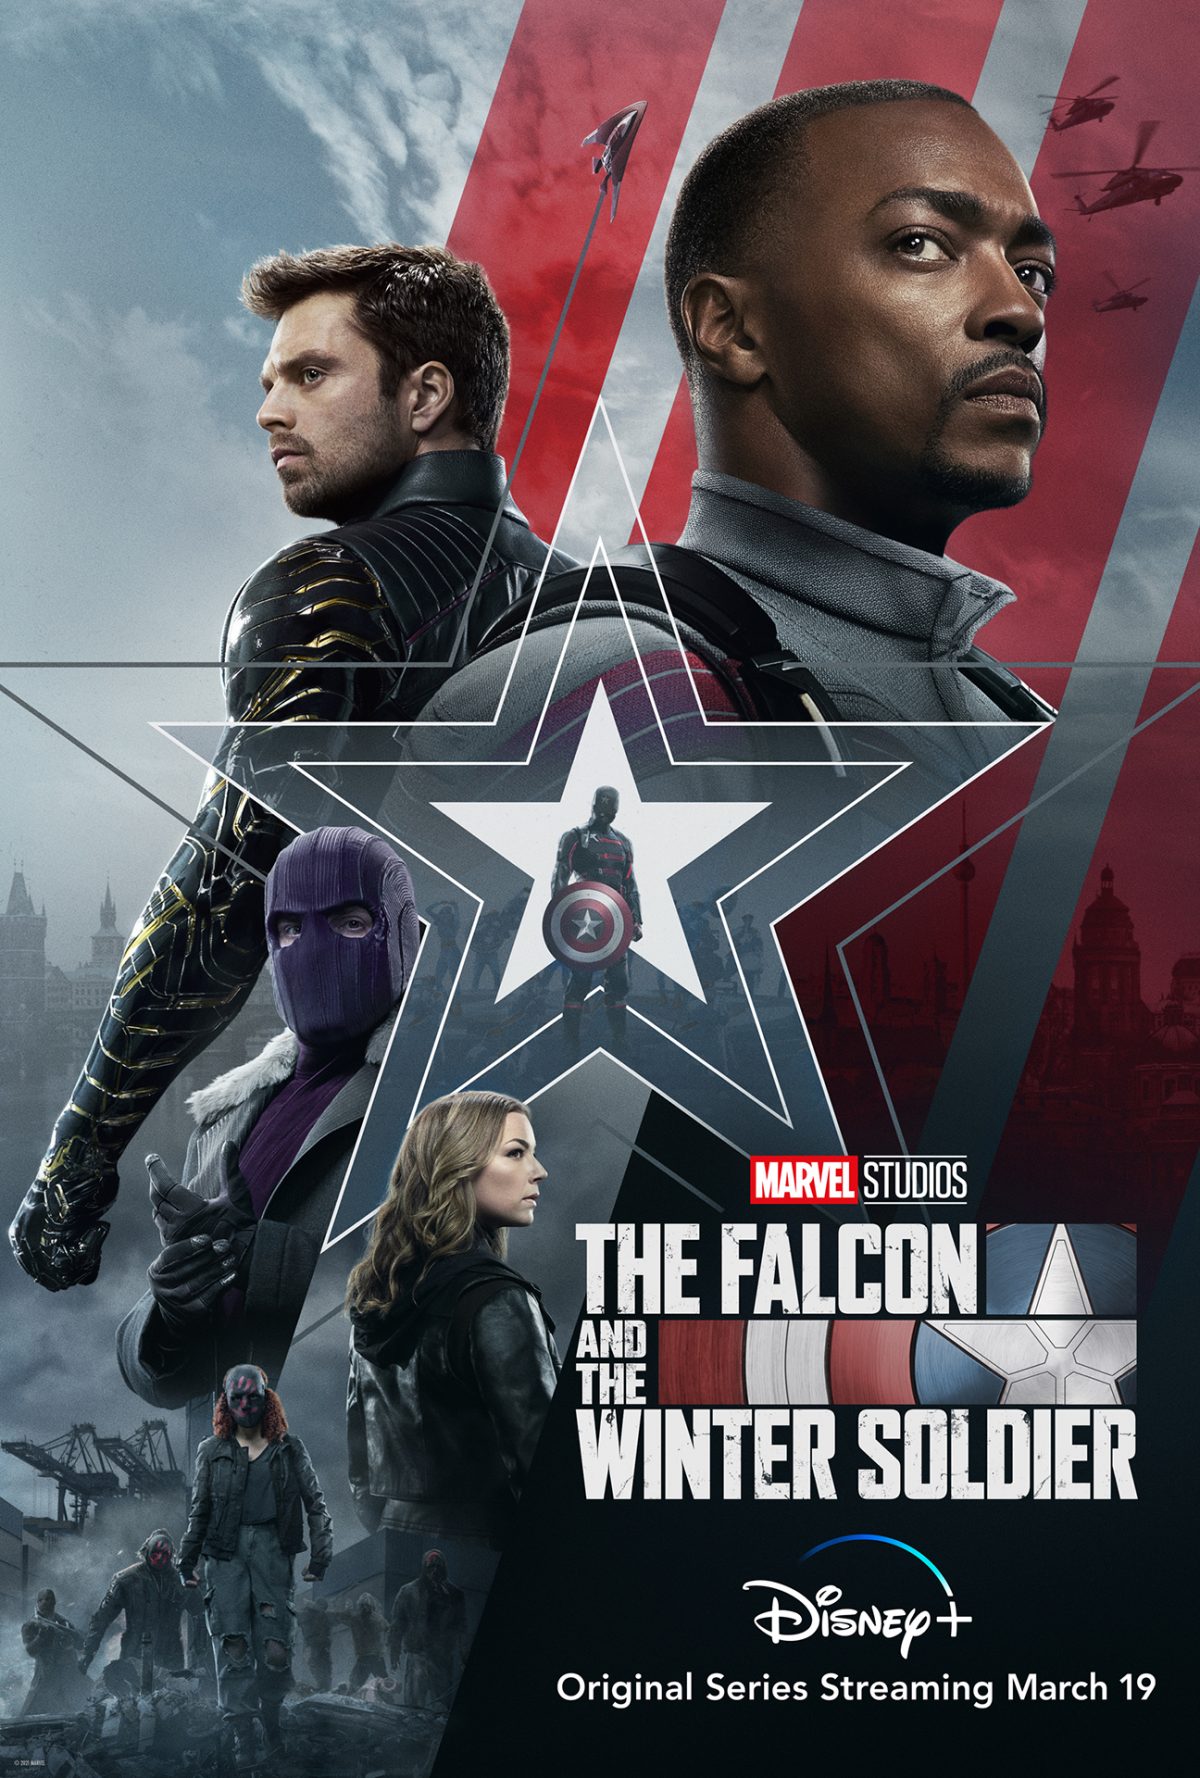 New Trailer Debuts for 'The Falcon and The Winter Soldier' - The Walt